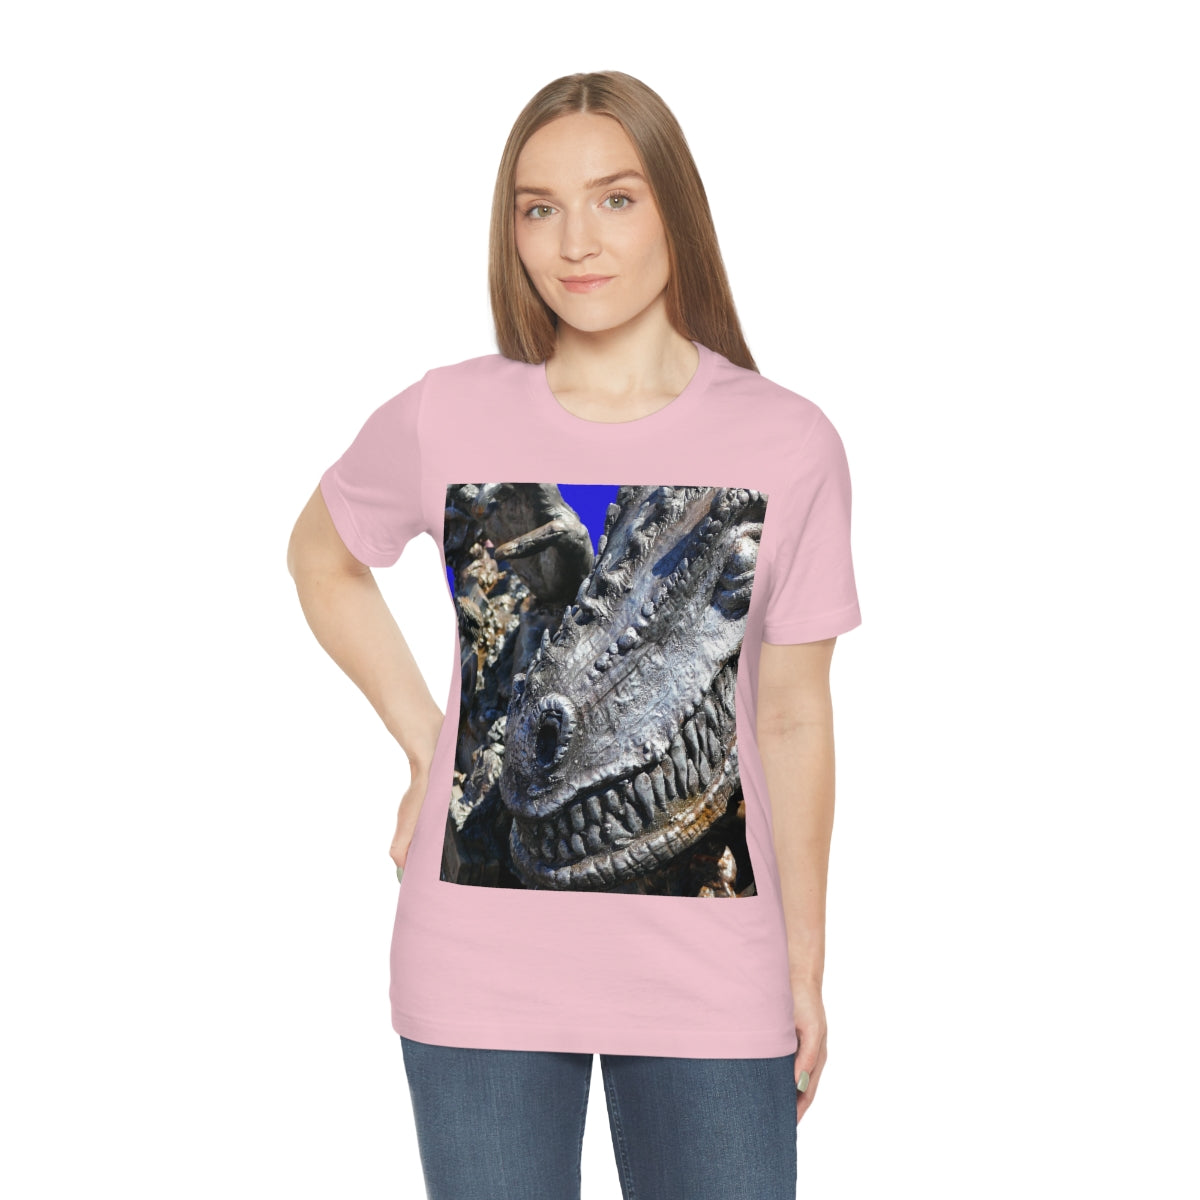 Delectable Vision - Unisex Jersey Short Sleeve T-Shirt - Fry1Productions